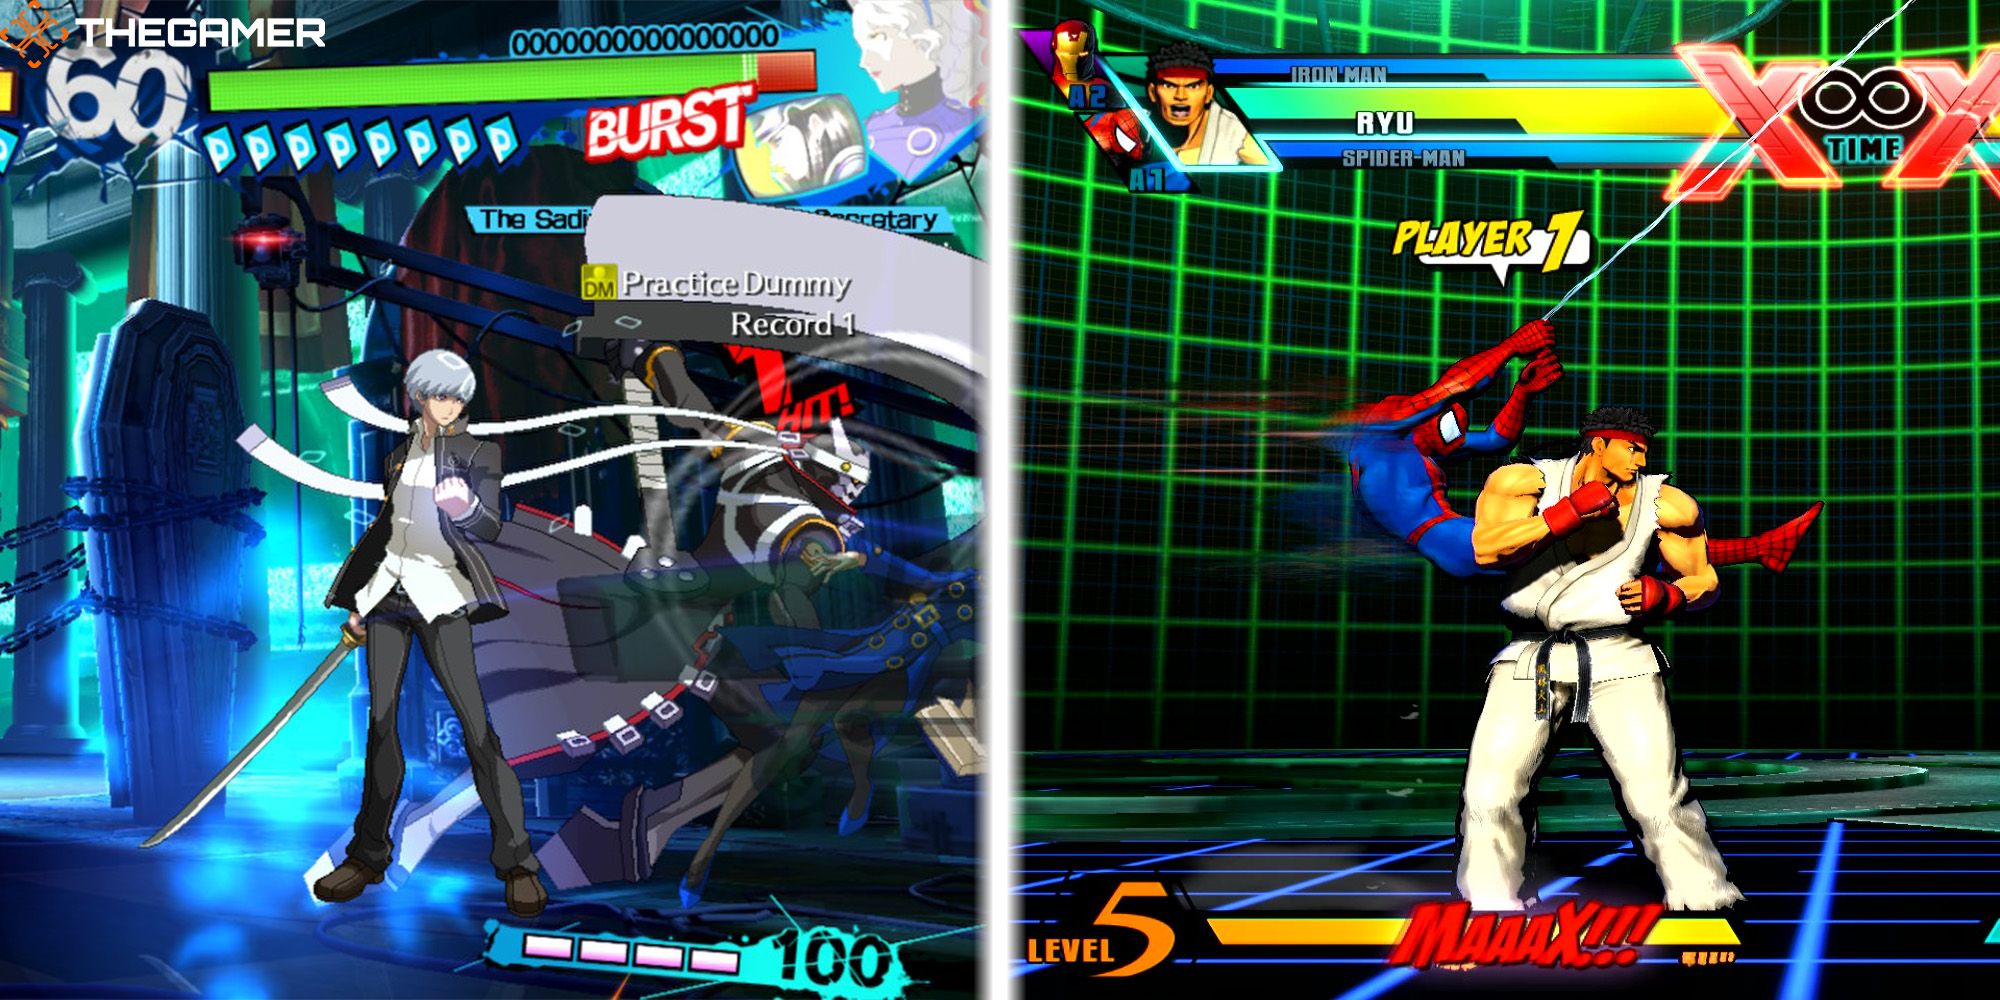 [Left Panel] Yu summons his persona, Izanagi, to attack Margaret. Persona 4 Arena Ultimax. [Right Panel] Ryu calls in Spiderman, who assists with a Web Swing attack. Ultimate Marvel VS. Capcom 3.